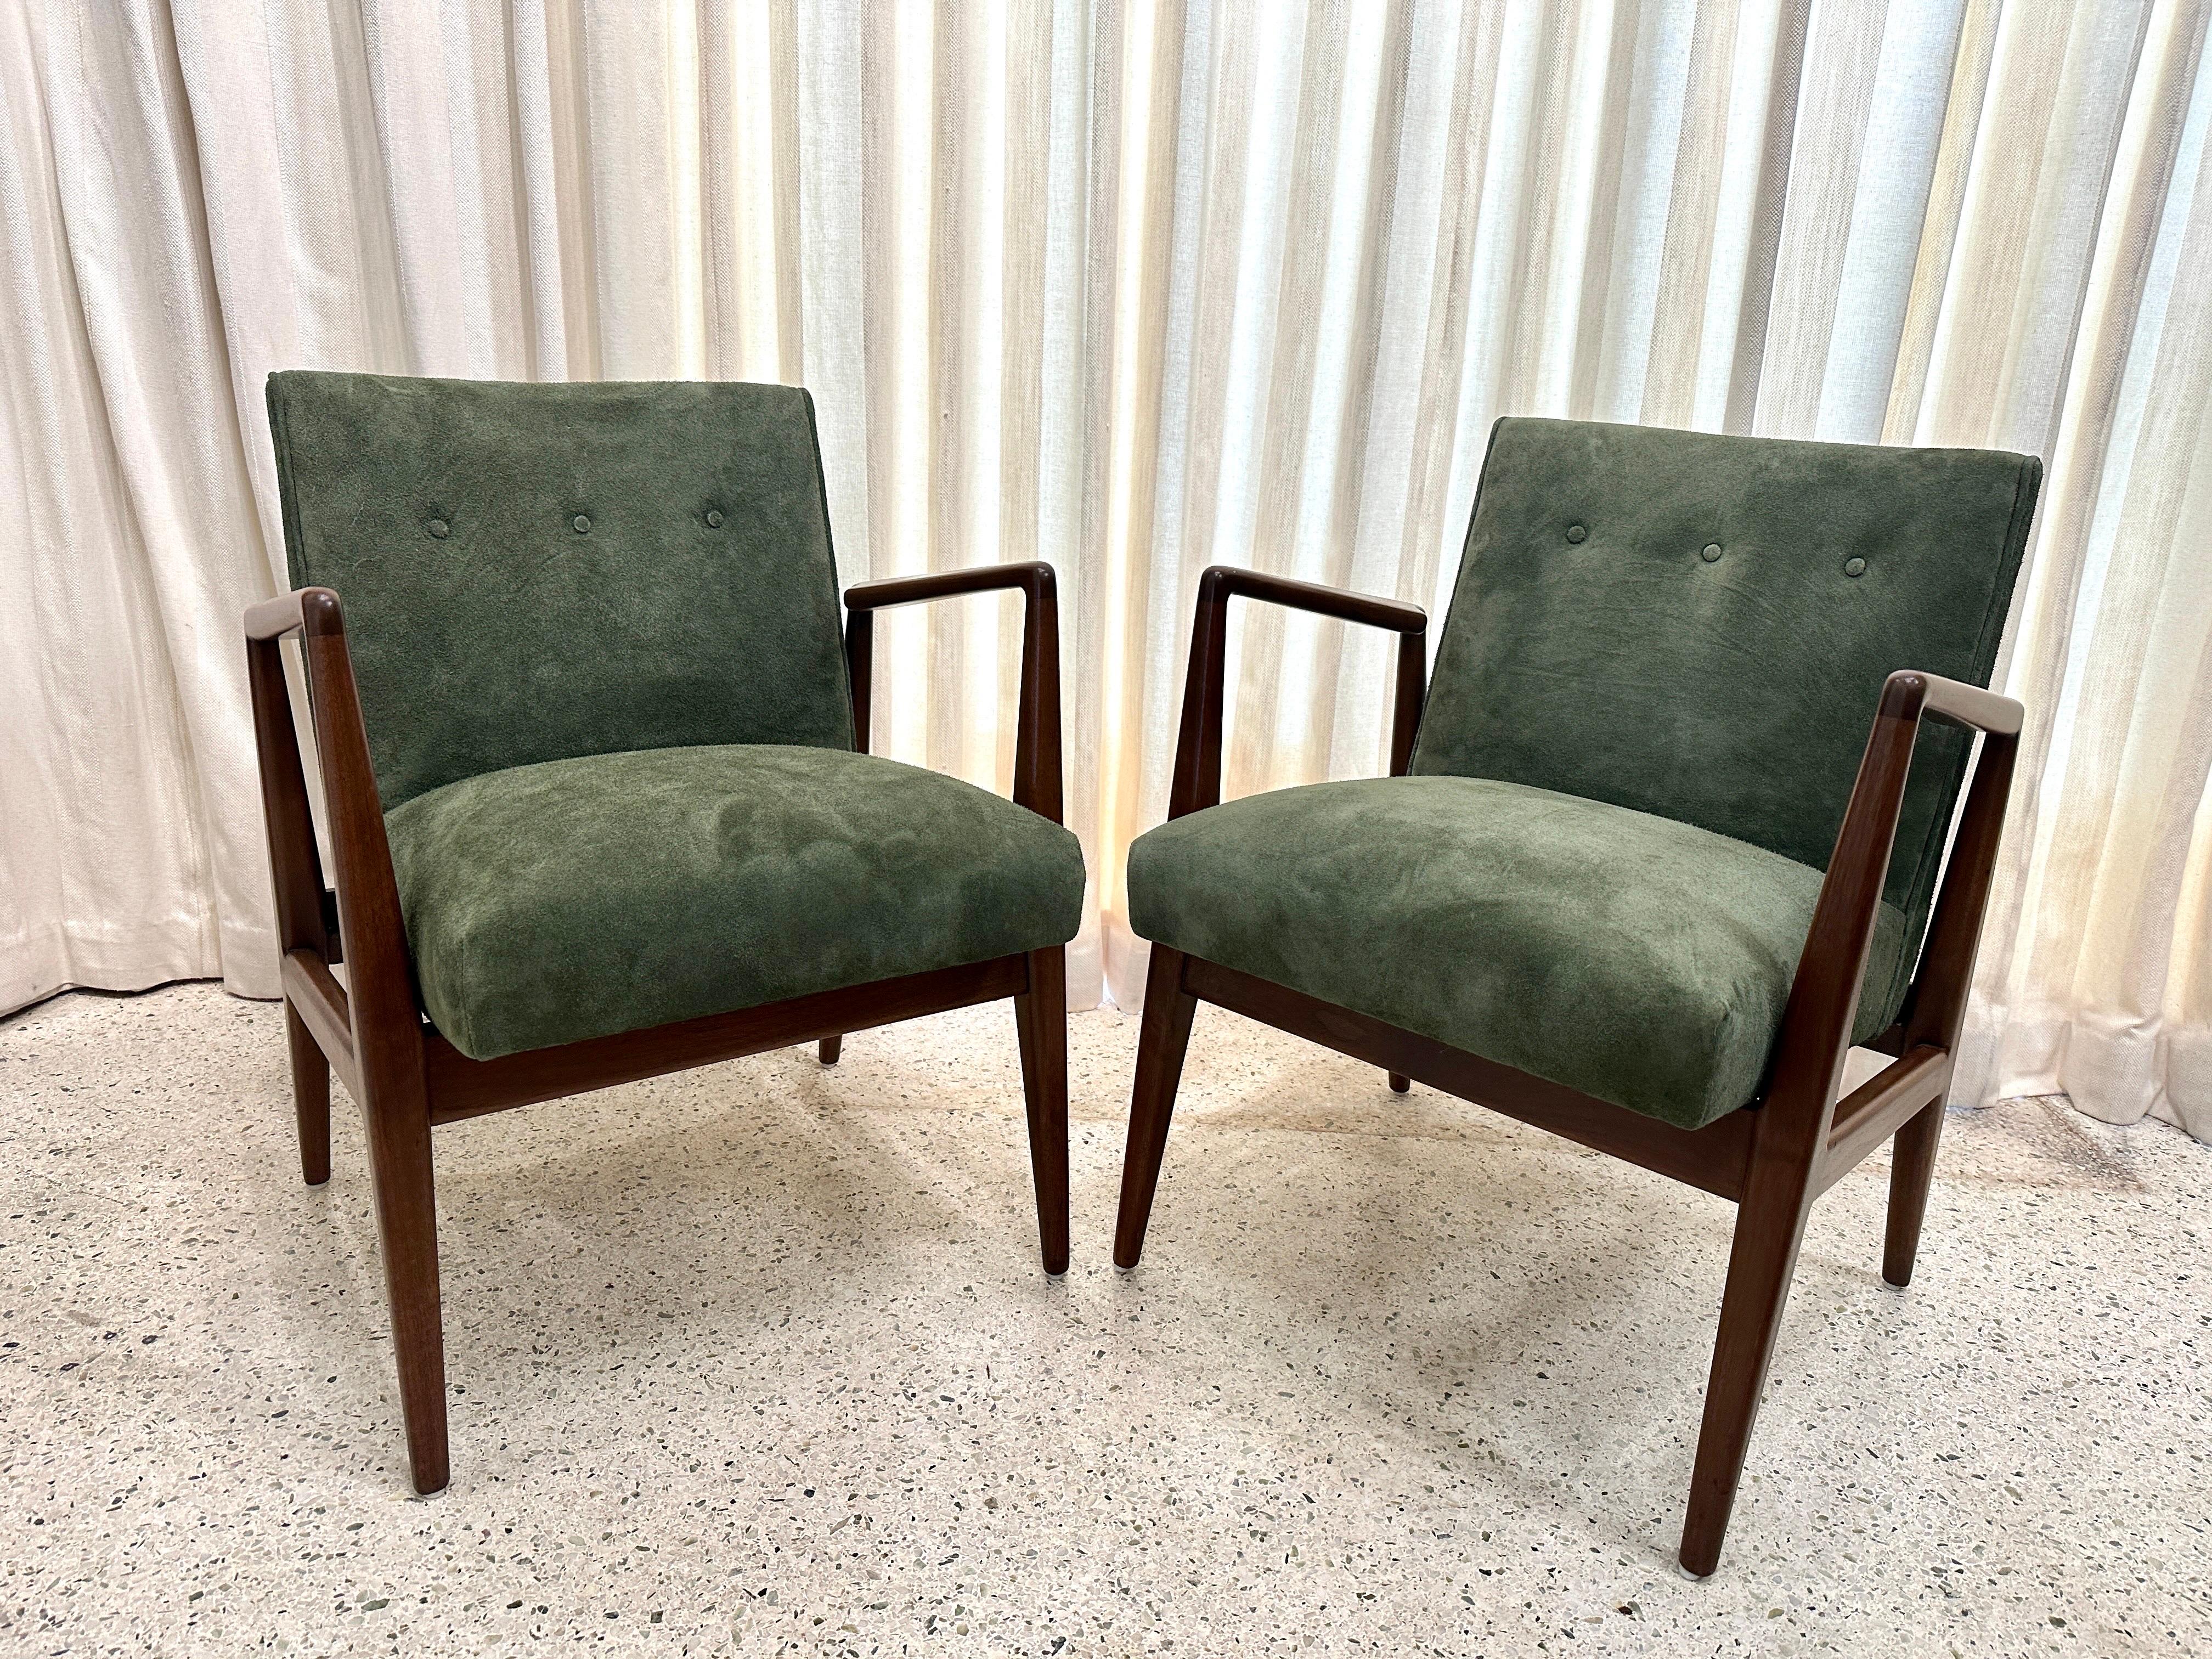 Mid-Century Modern Original Vintage Jens Risom Armchairs in Green Suede w/ Label, PAIR For Sale